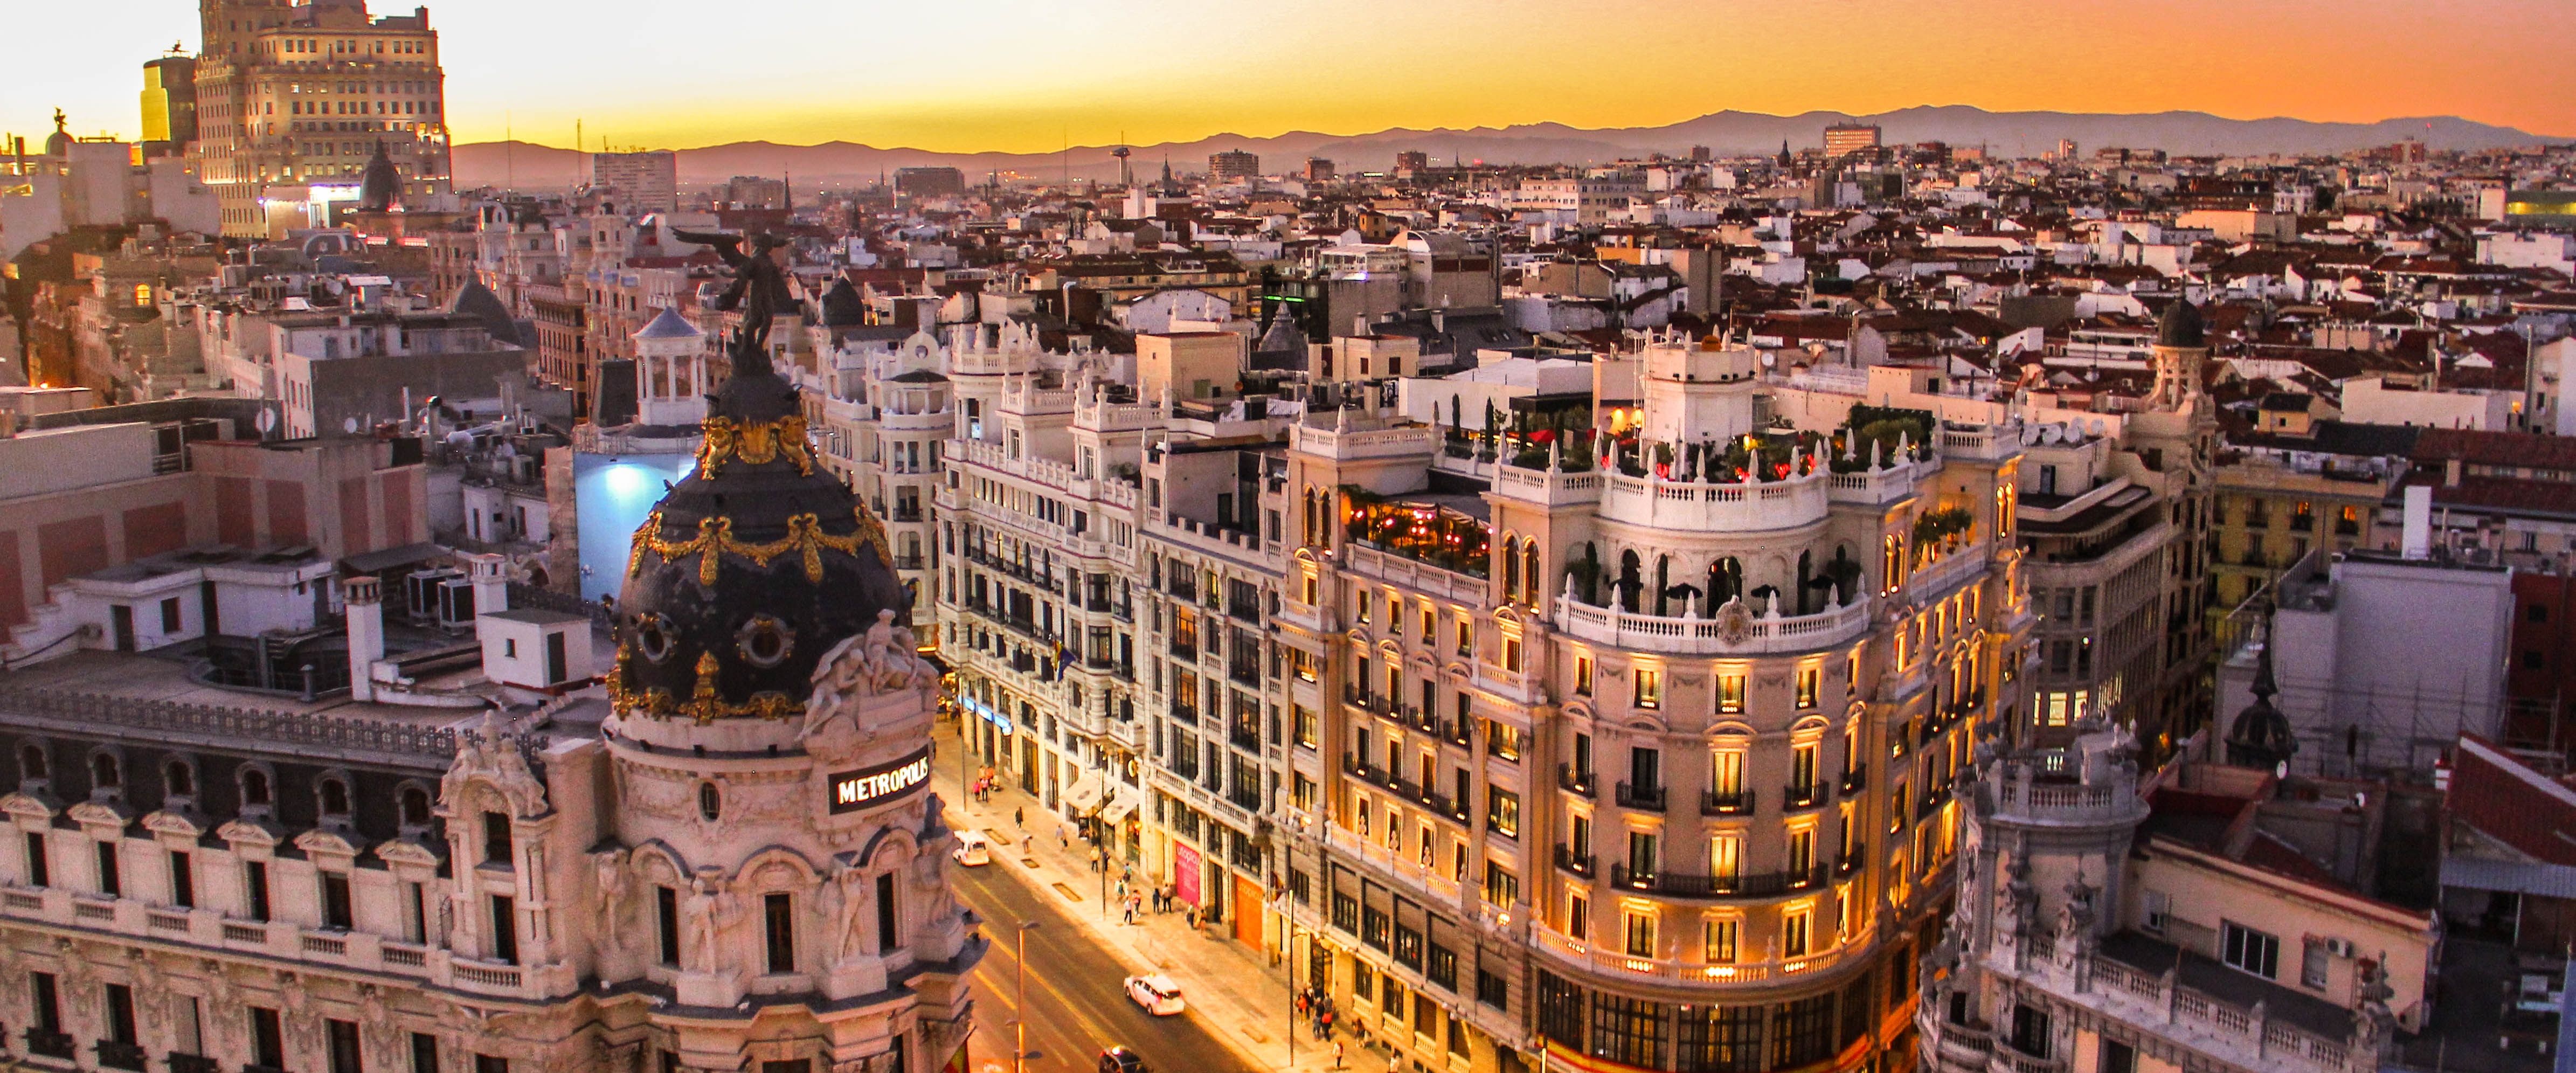 Study abroad in the heart of Spain